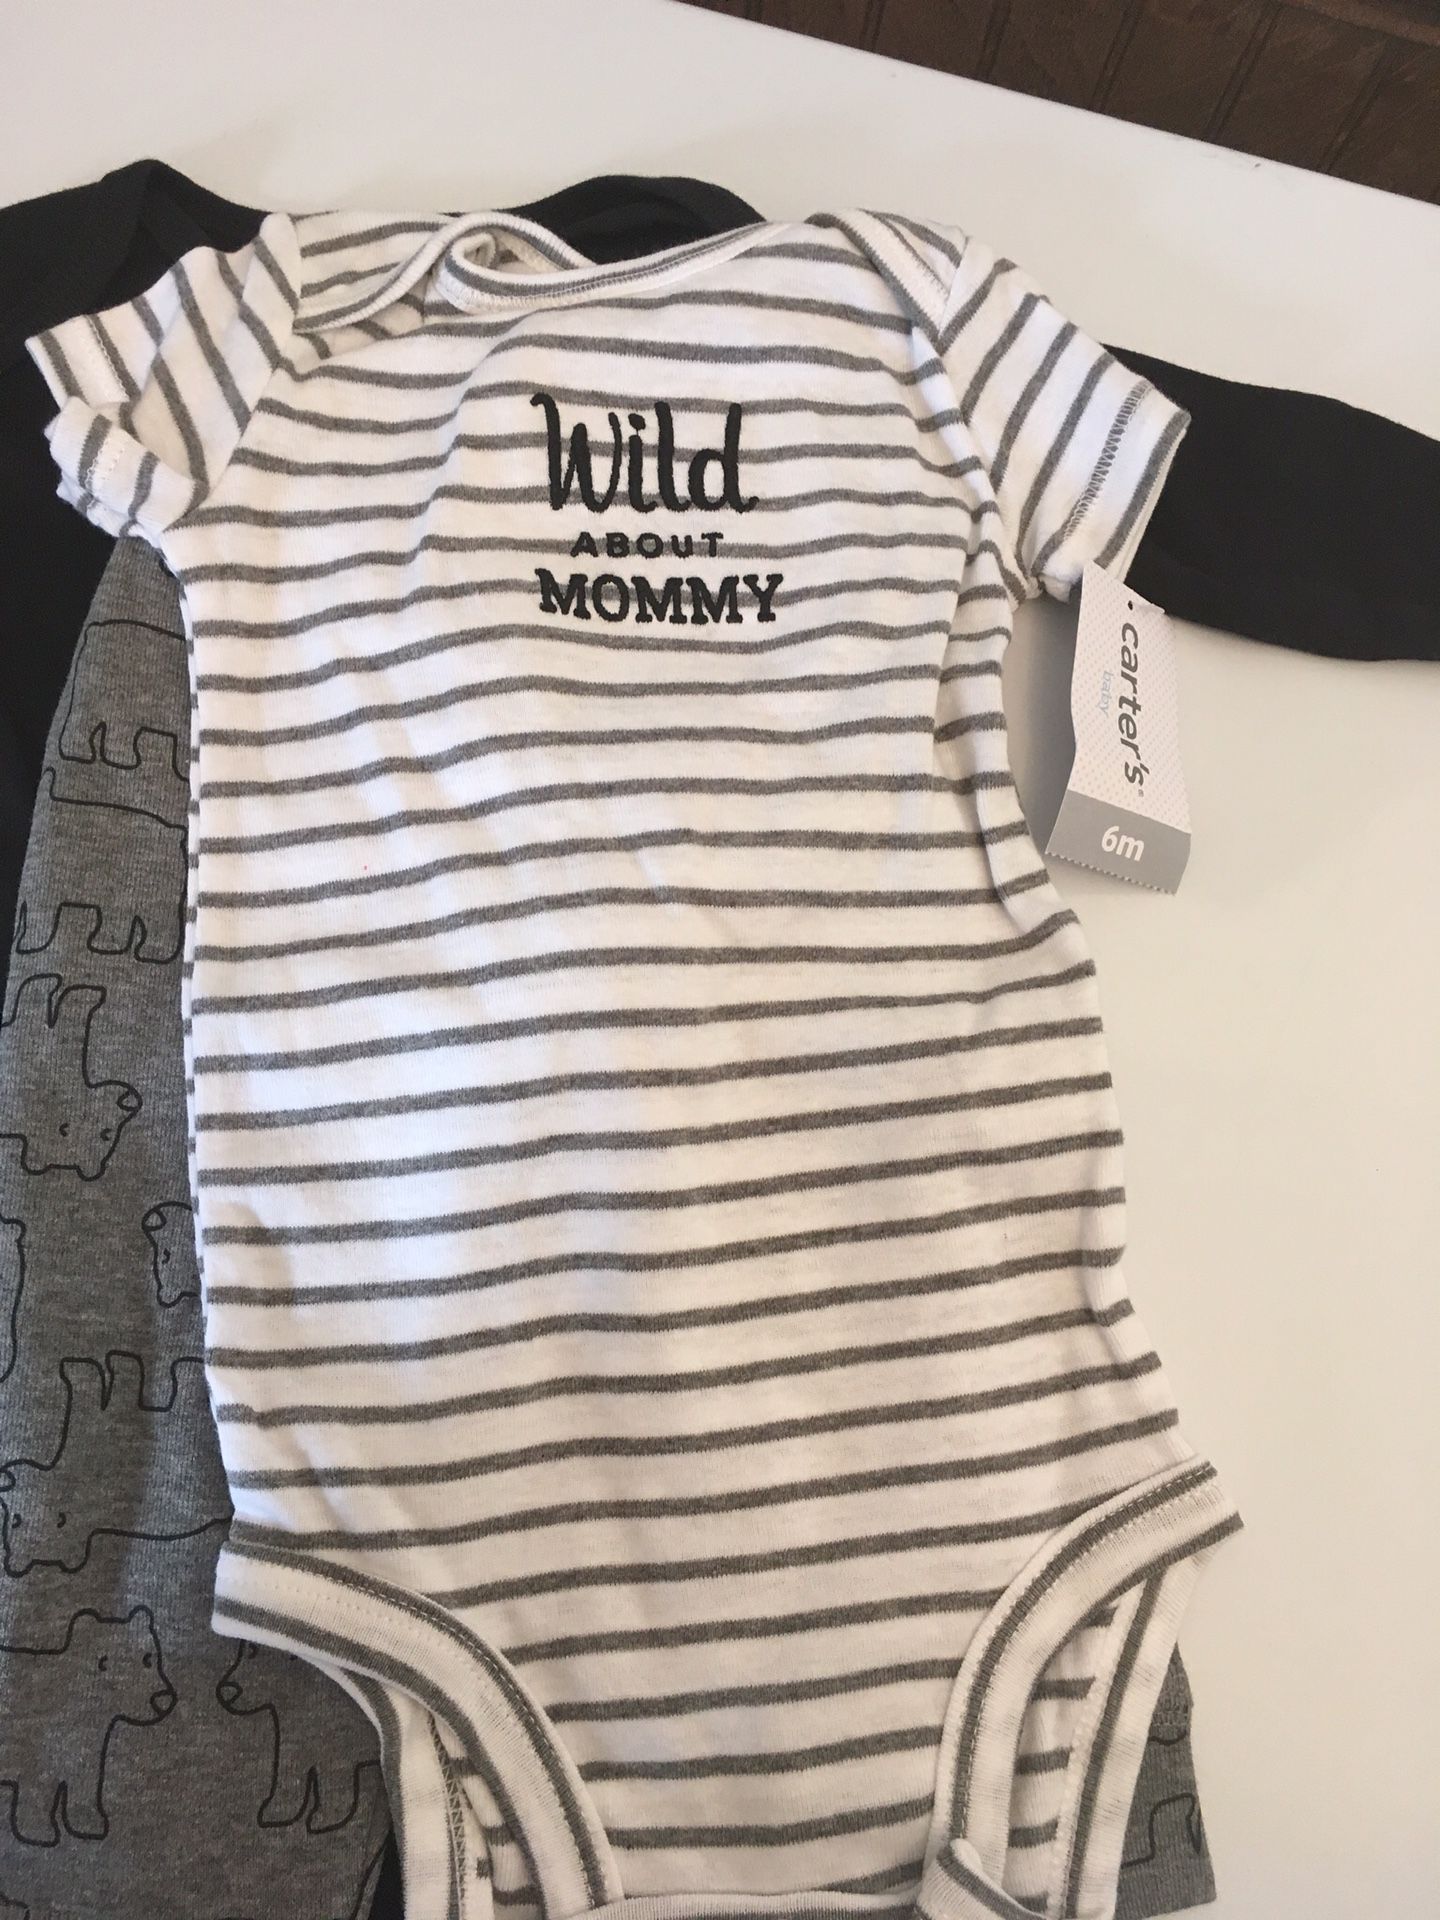 Brand new infant boy outfit